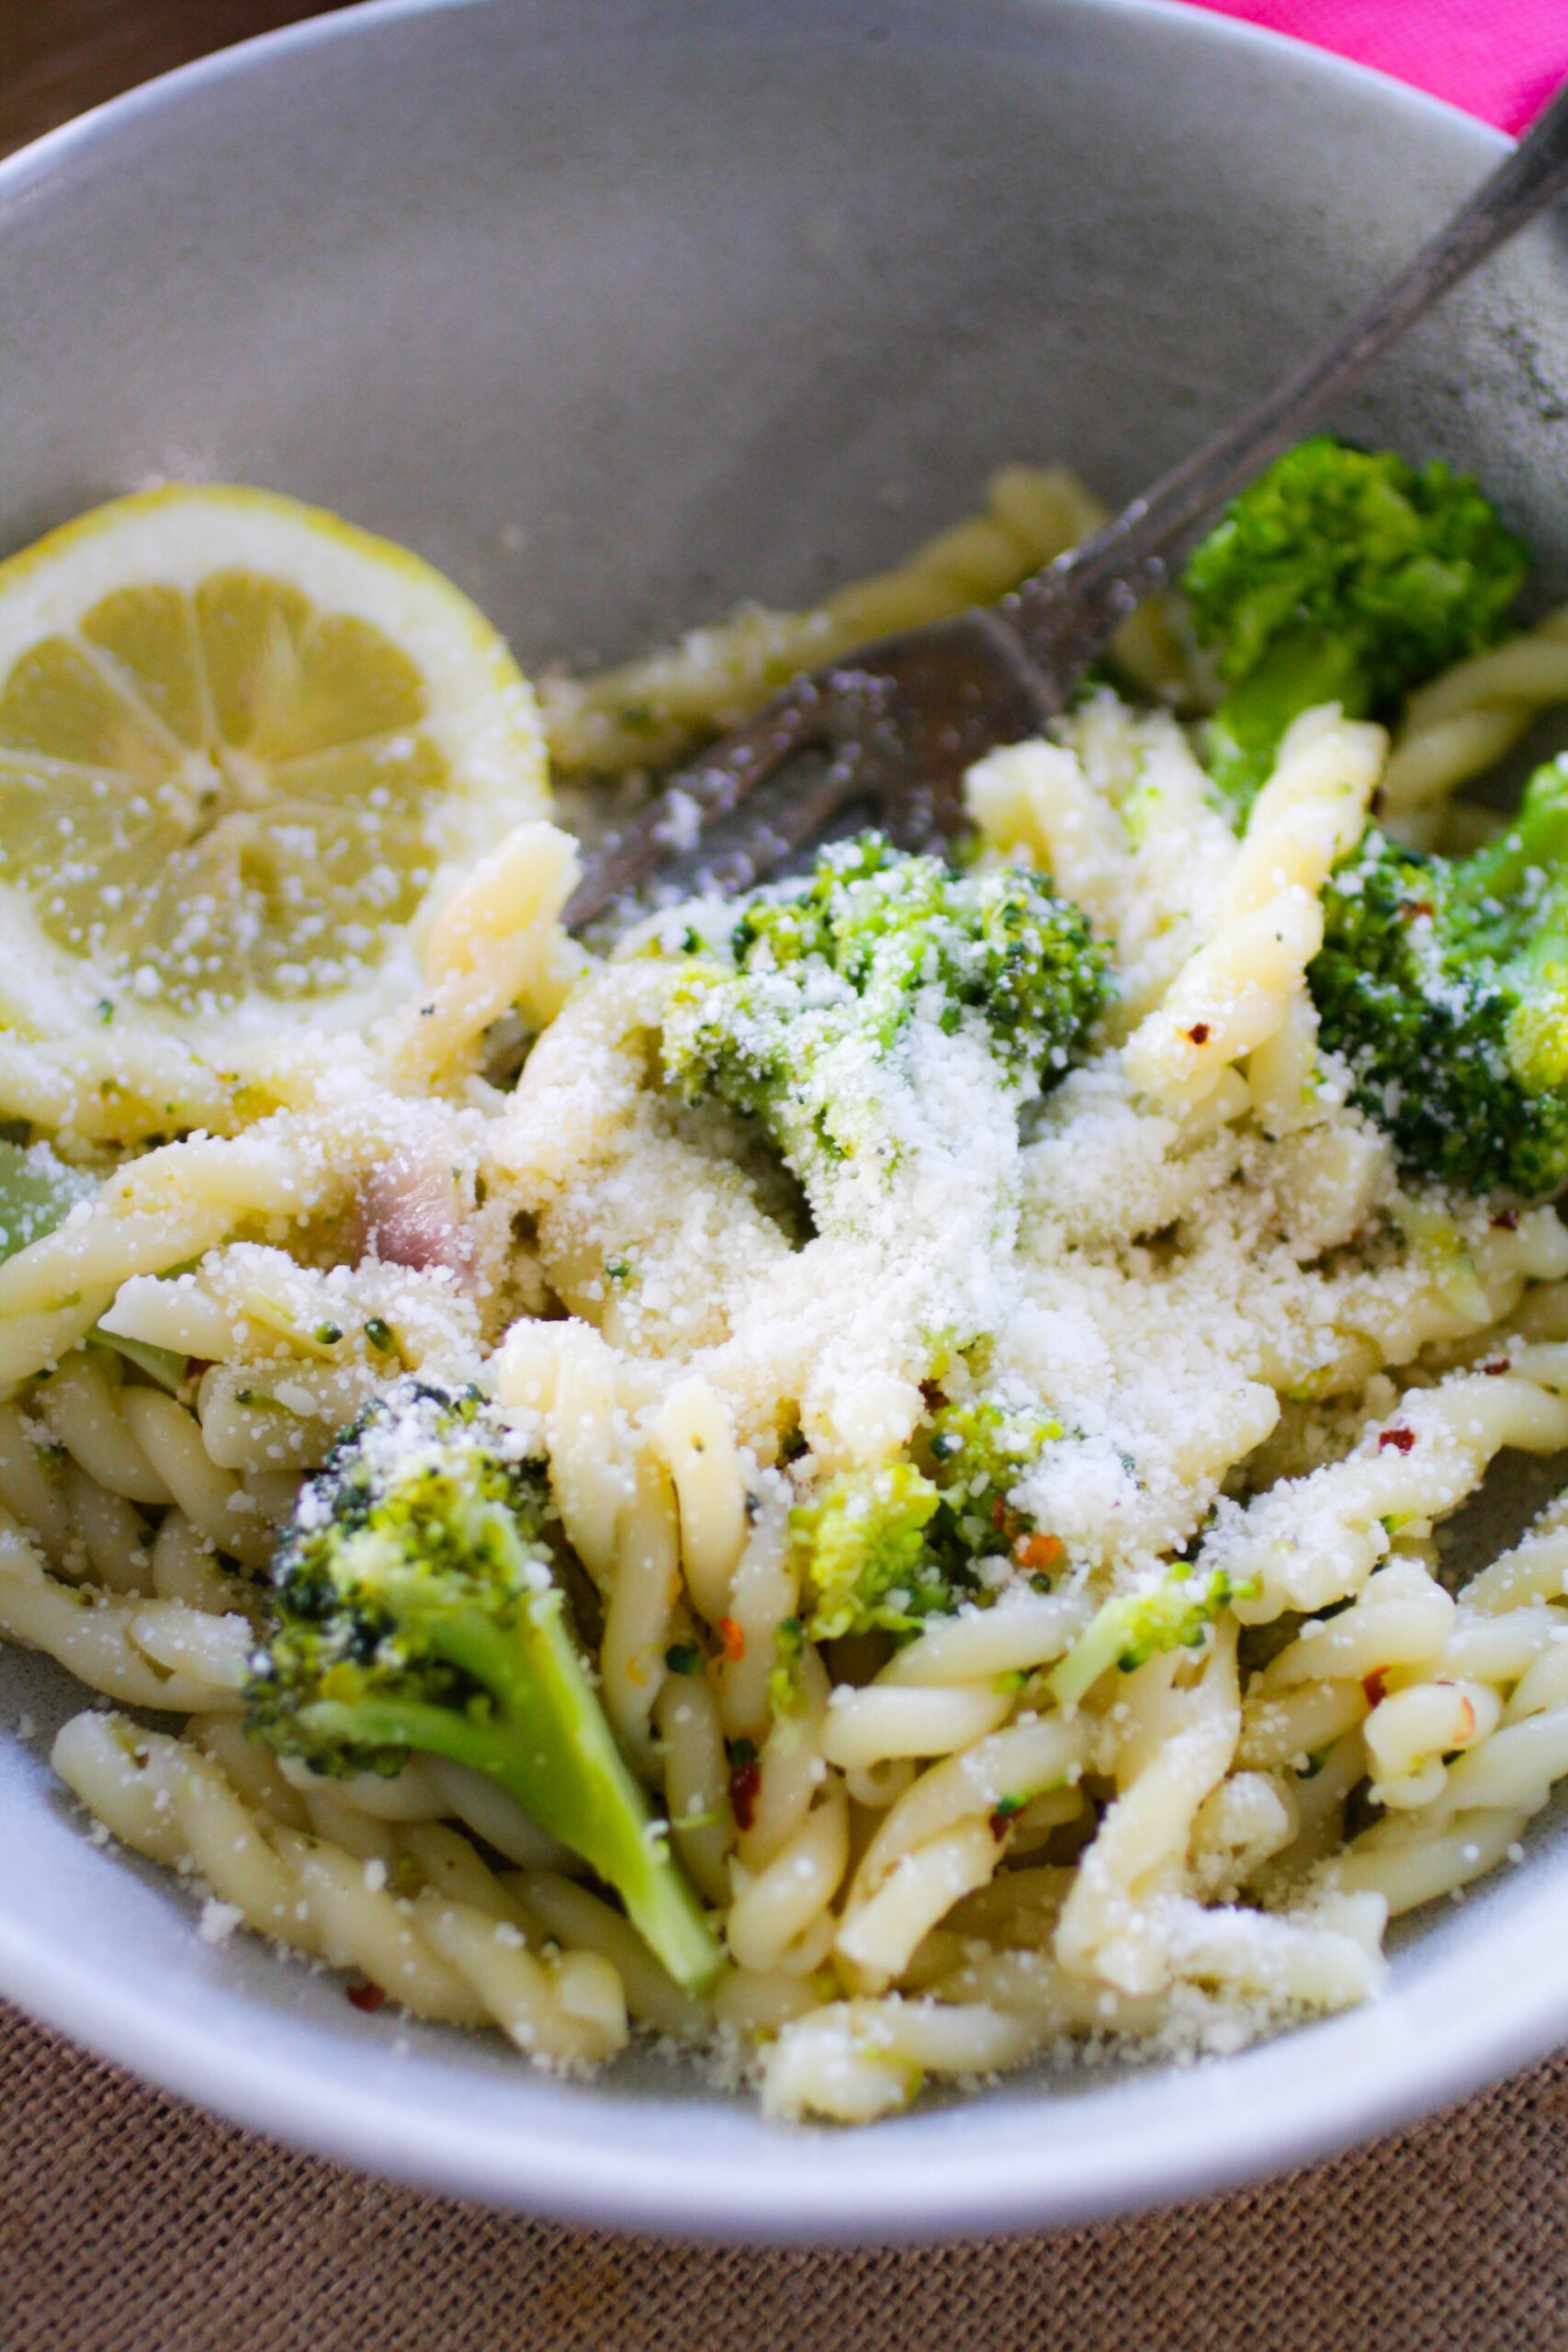 A bowl of spiral pasta with broccoli florets mixed in and covered in Parmesan cheese and a lemon slice on the side.